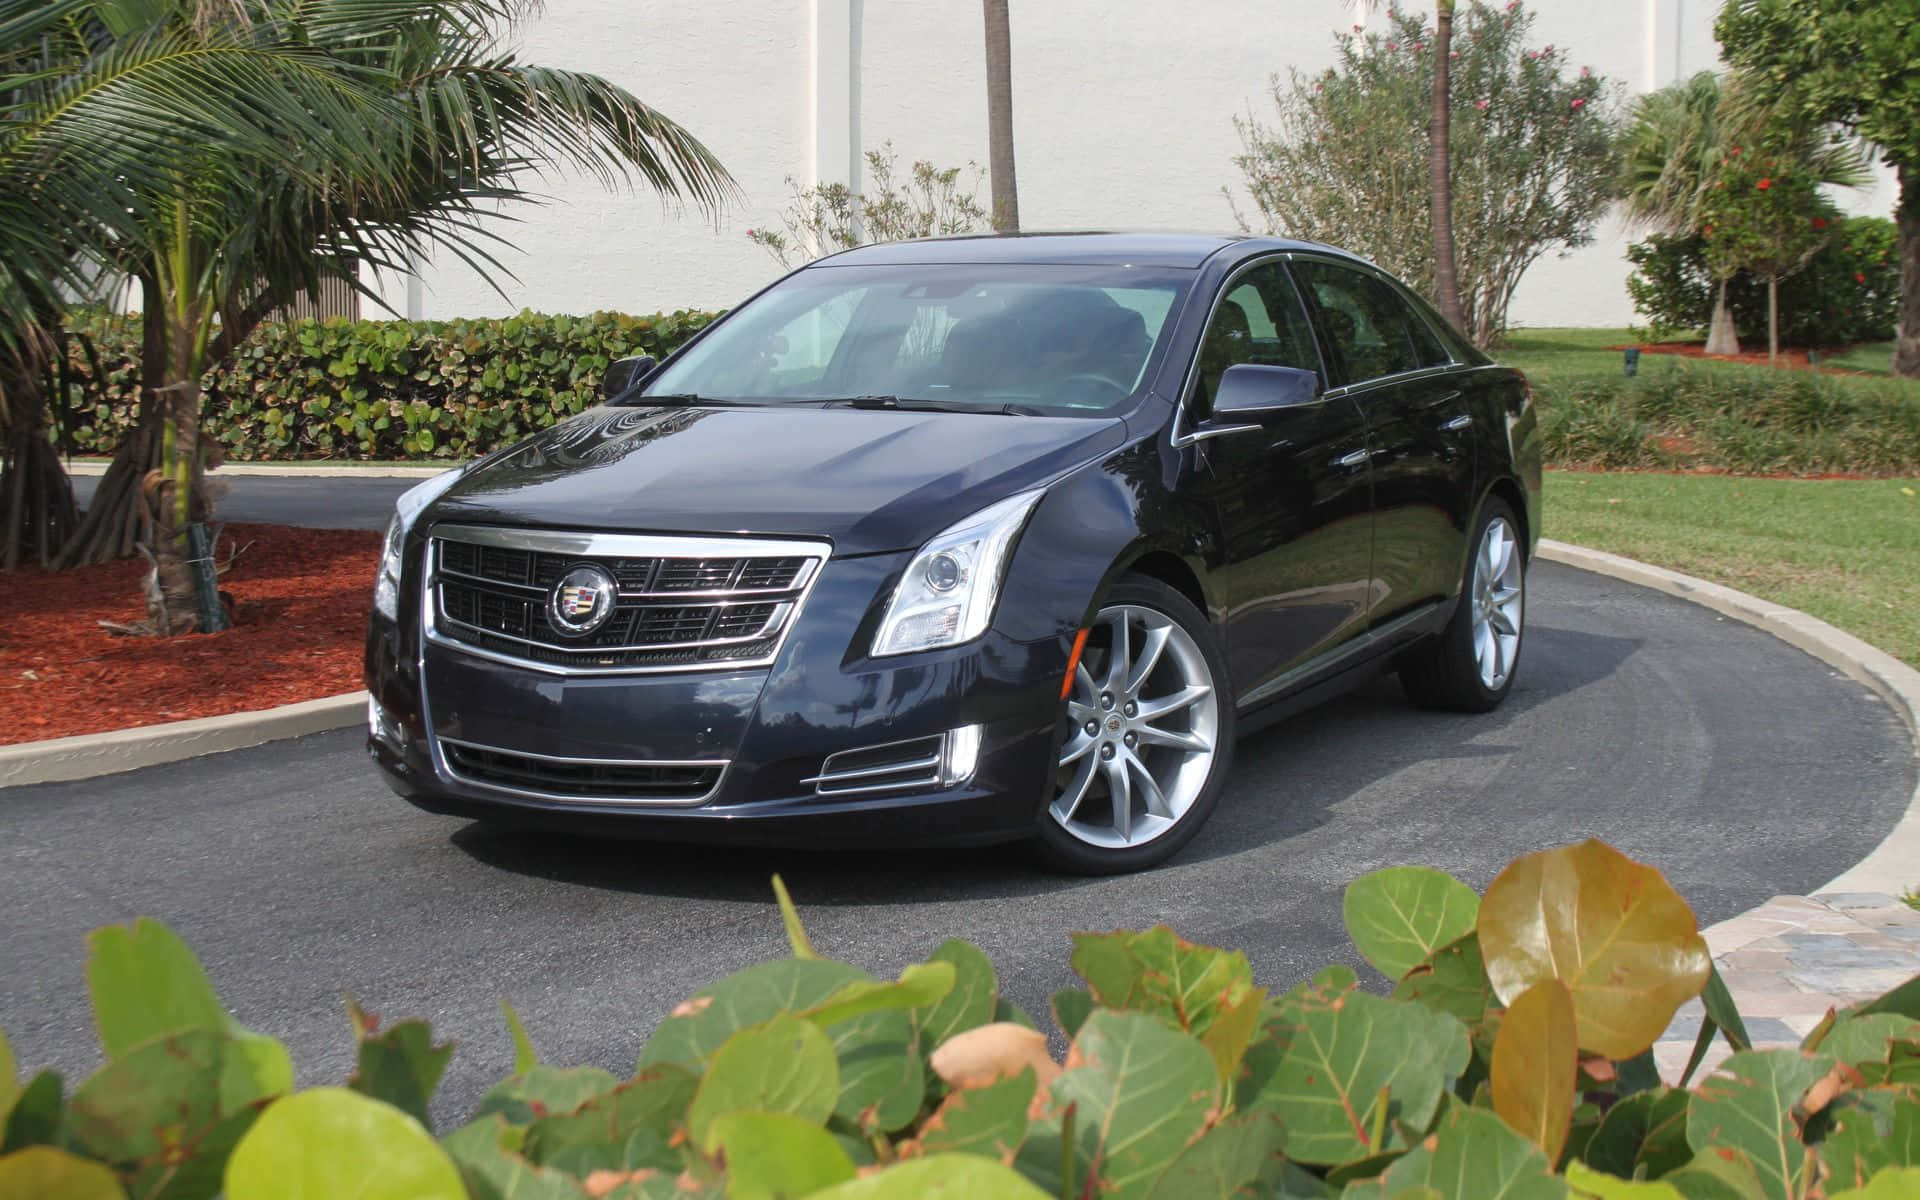 Sleek and Luxurious Cadillac XTS in the City Wallpaper